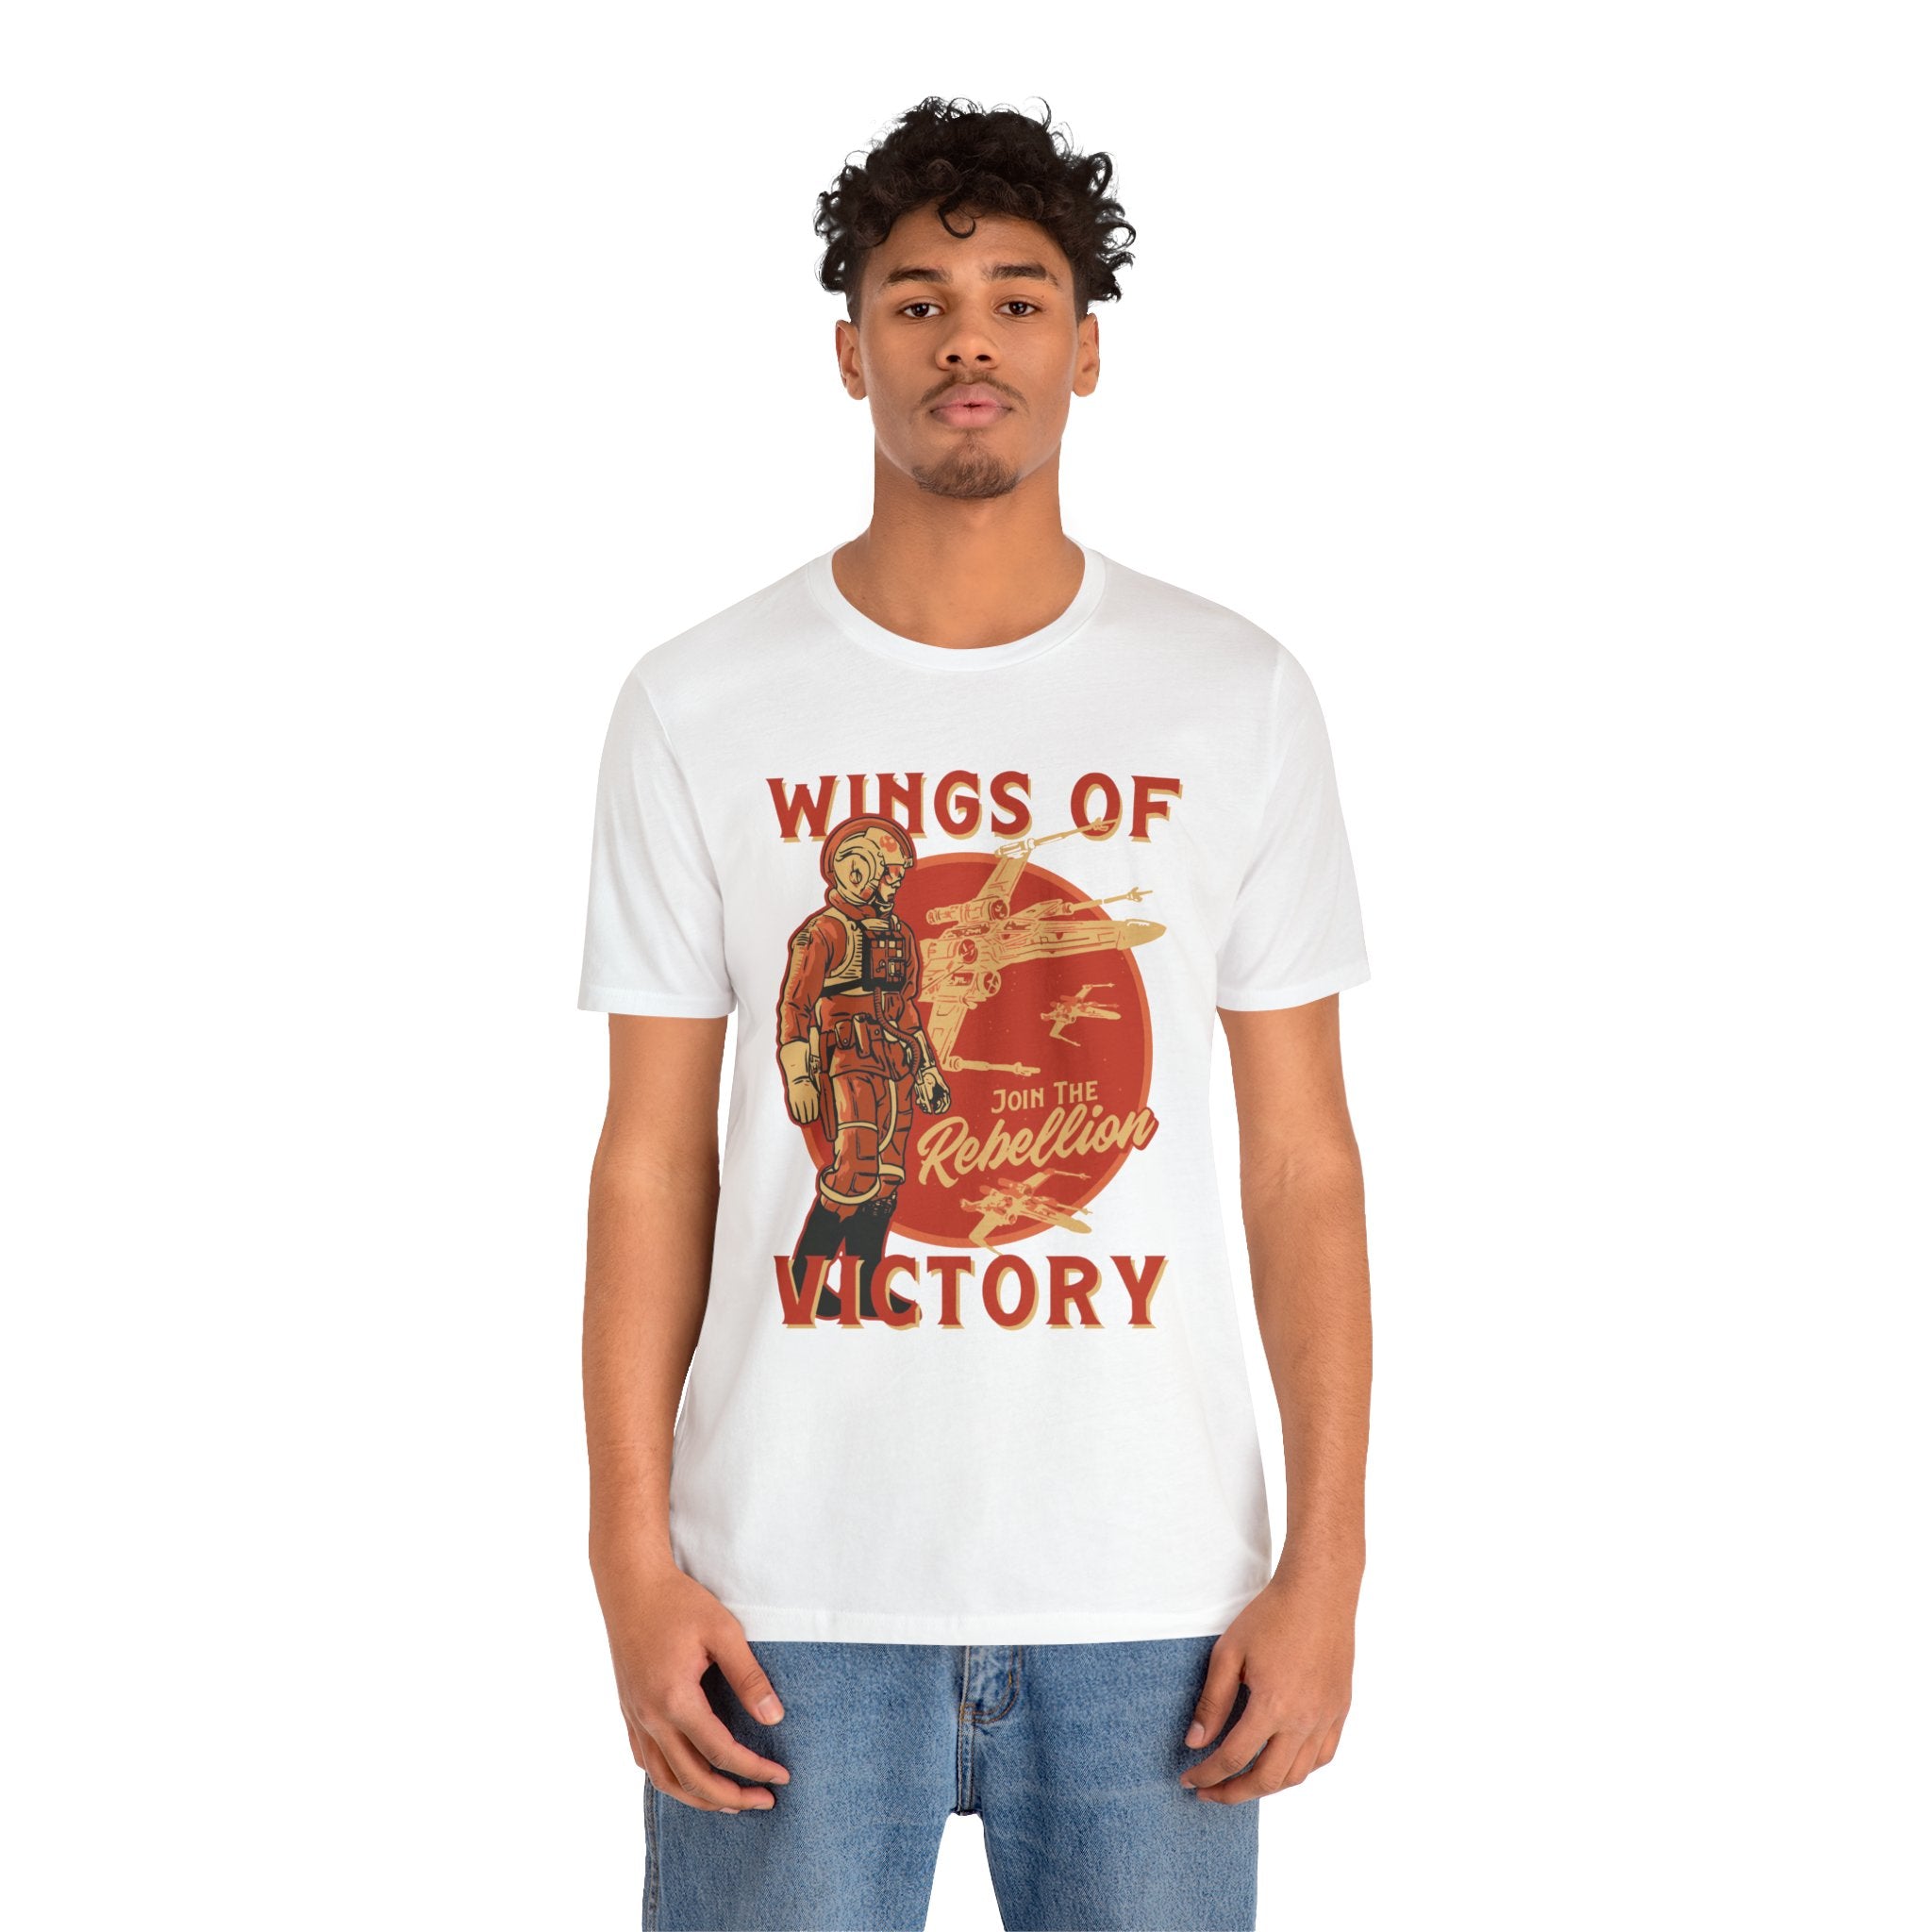 Man modeling a white unisex Wings of Victory T-Shirt with a quality print "wings of rebellion victory" graphic, paired with blue jeans, against a plain background.